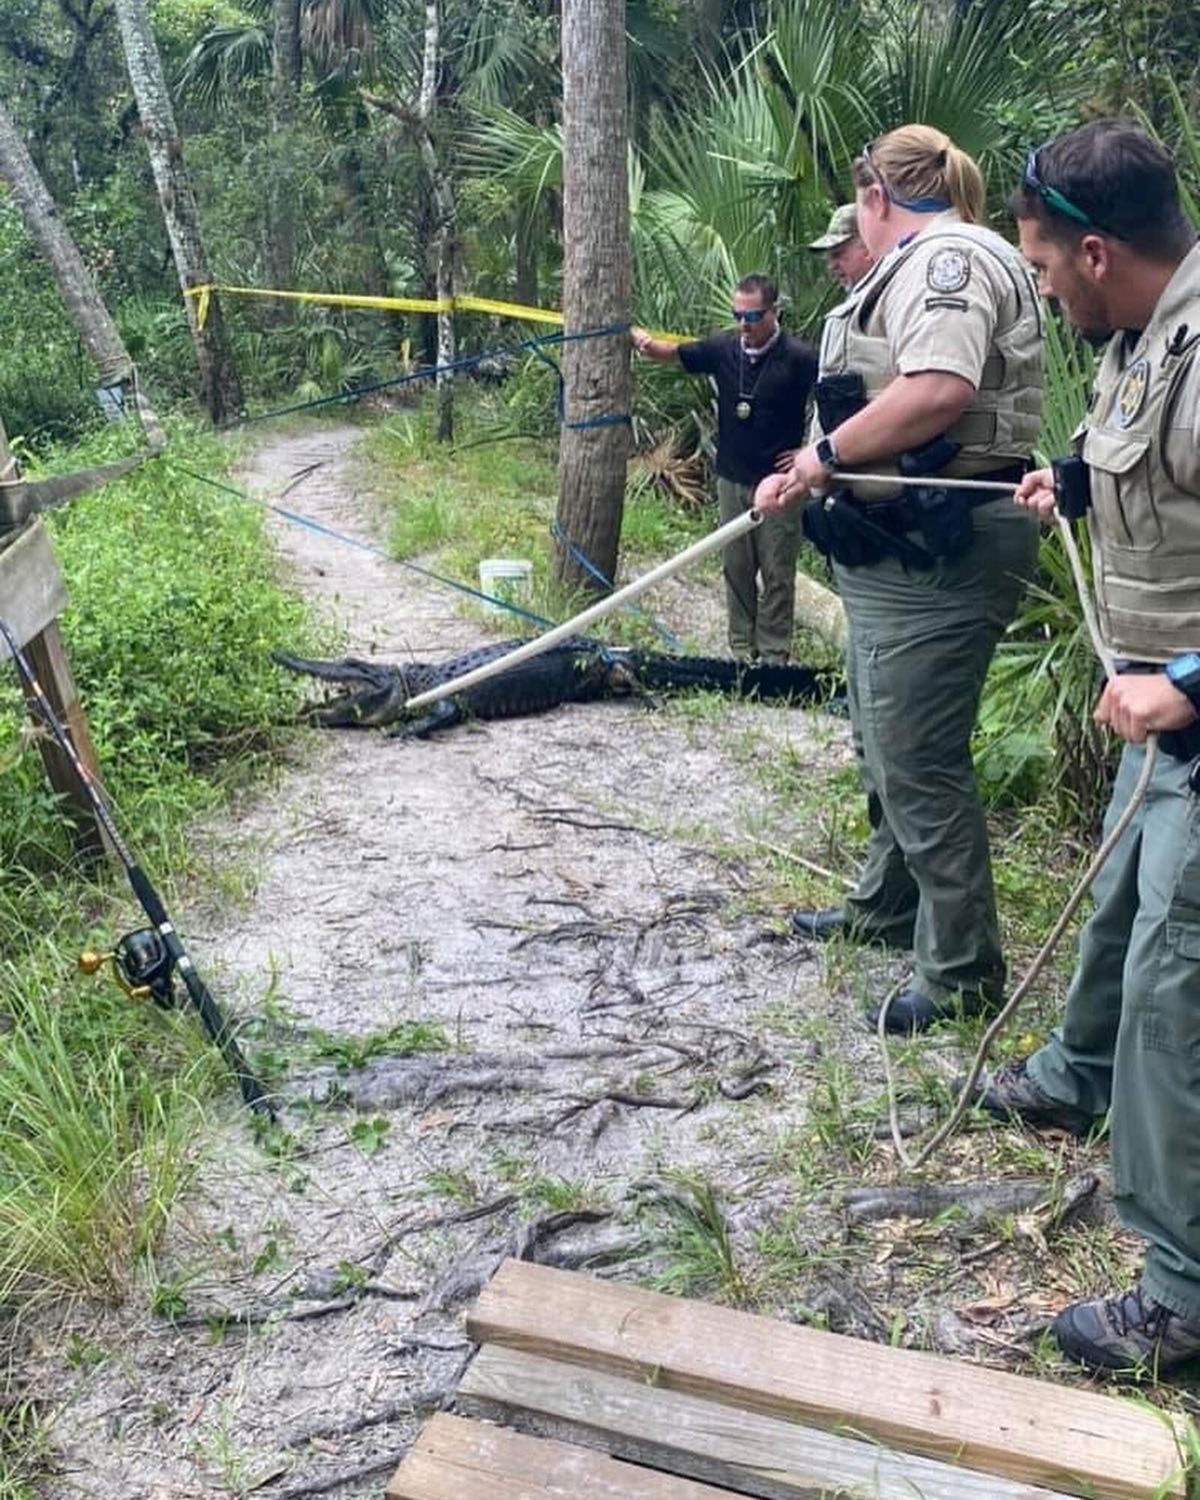 <i>Martin County Sheriff's Office</i><br/>A cyclist was bitten by an alligator and suffered severe injuries after he crashed his bike and fell into the water in a Florida park